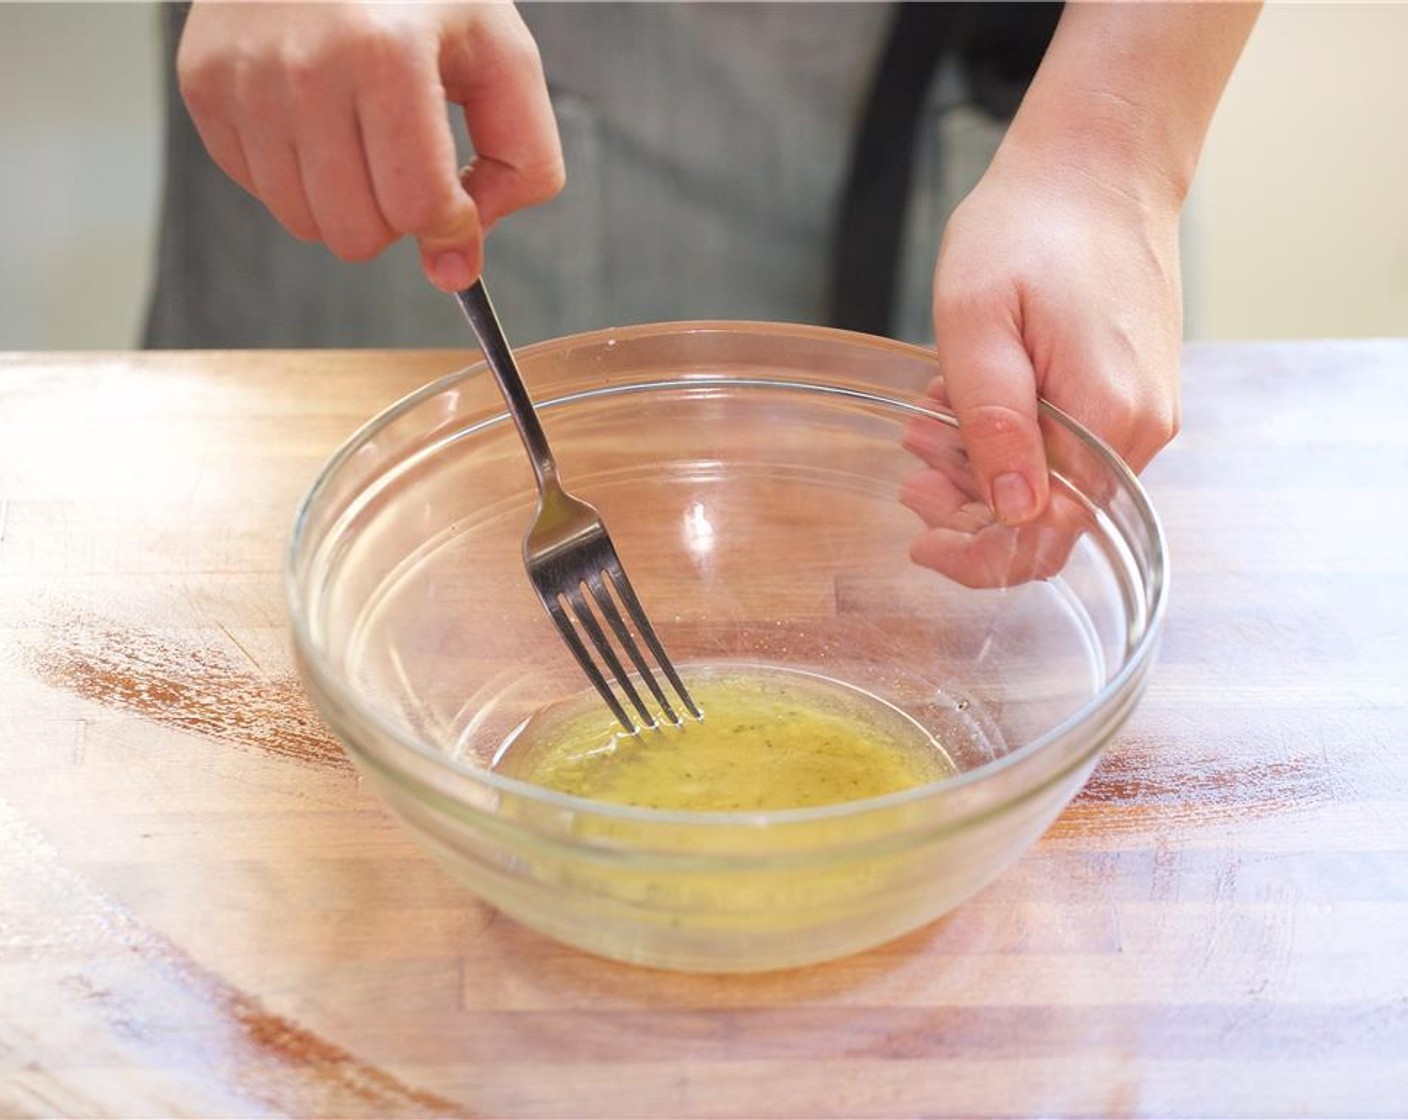 step 4 To create the vinaigrette, in a large bowl combine Dijon Mustard (1 Tbsp), one tablespoon of lemon juice, Salt (1/4 tsp), Ground Black Pepper (1/4 tsp), and Olive Oil (1/4 cup). Mix until well combined and emulsified.